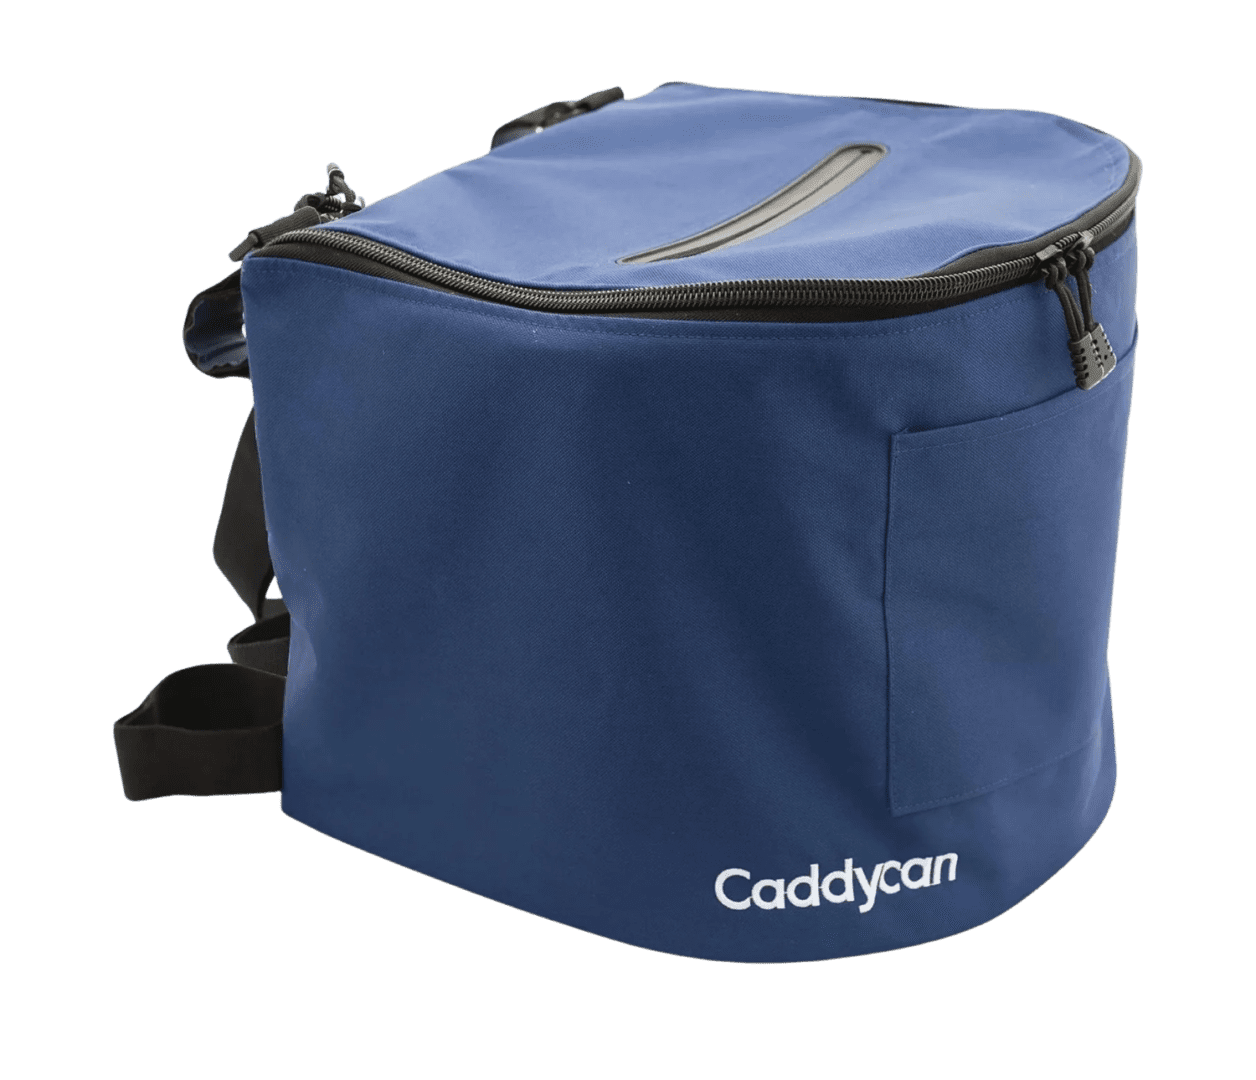 A blue bag with the words caddycam on it.